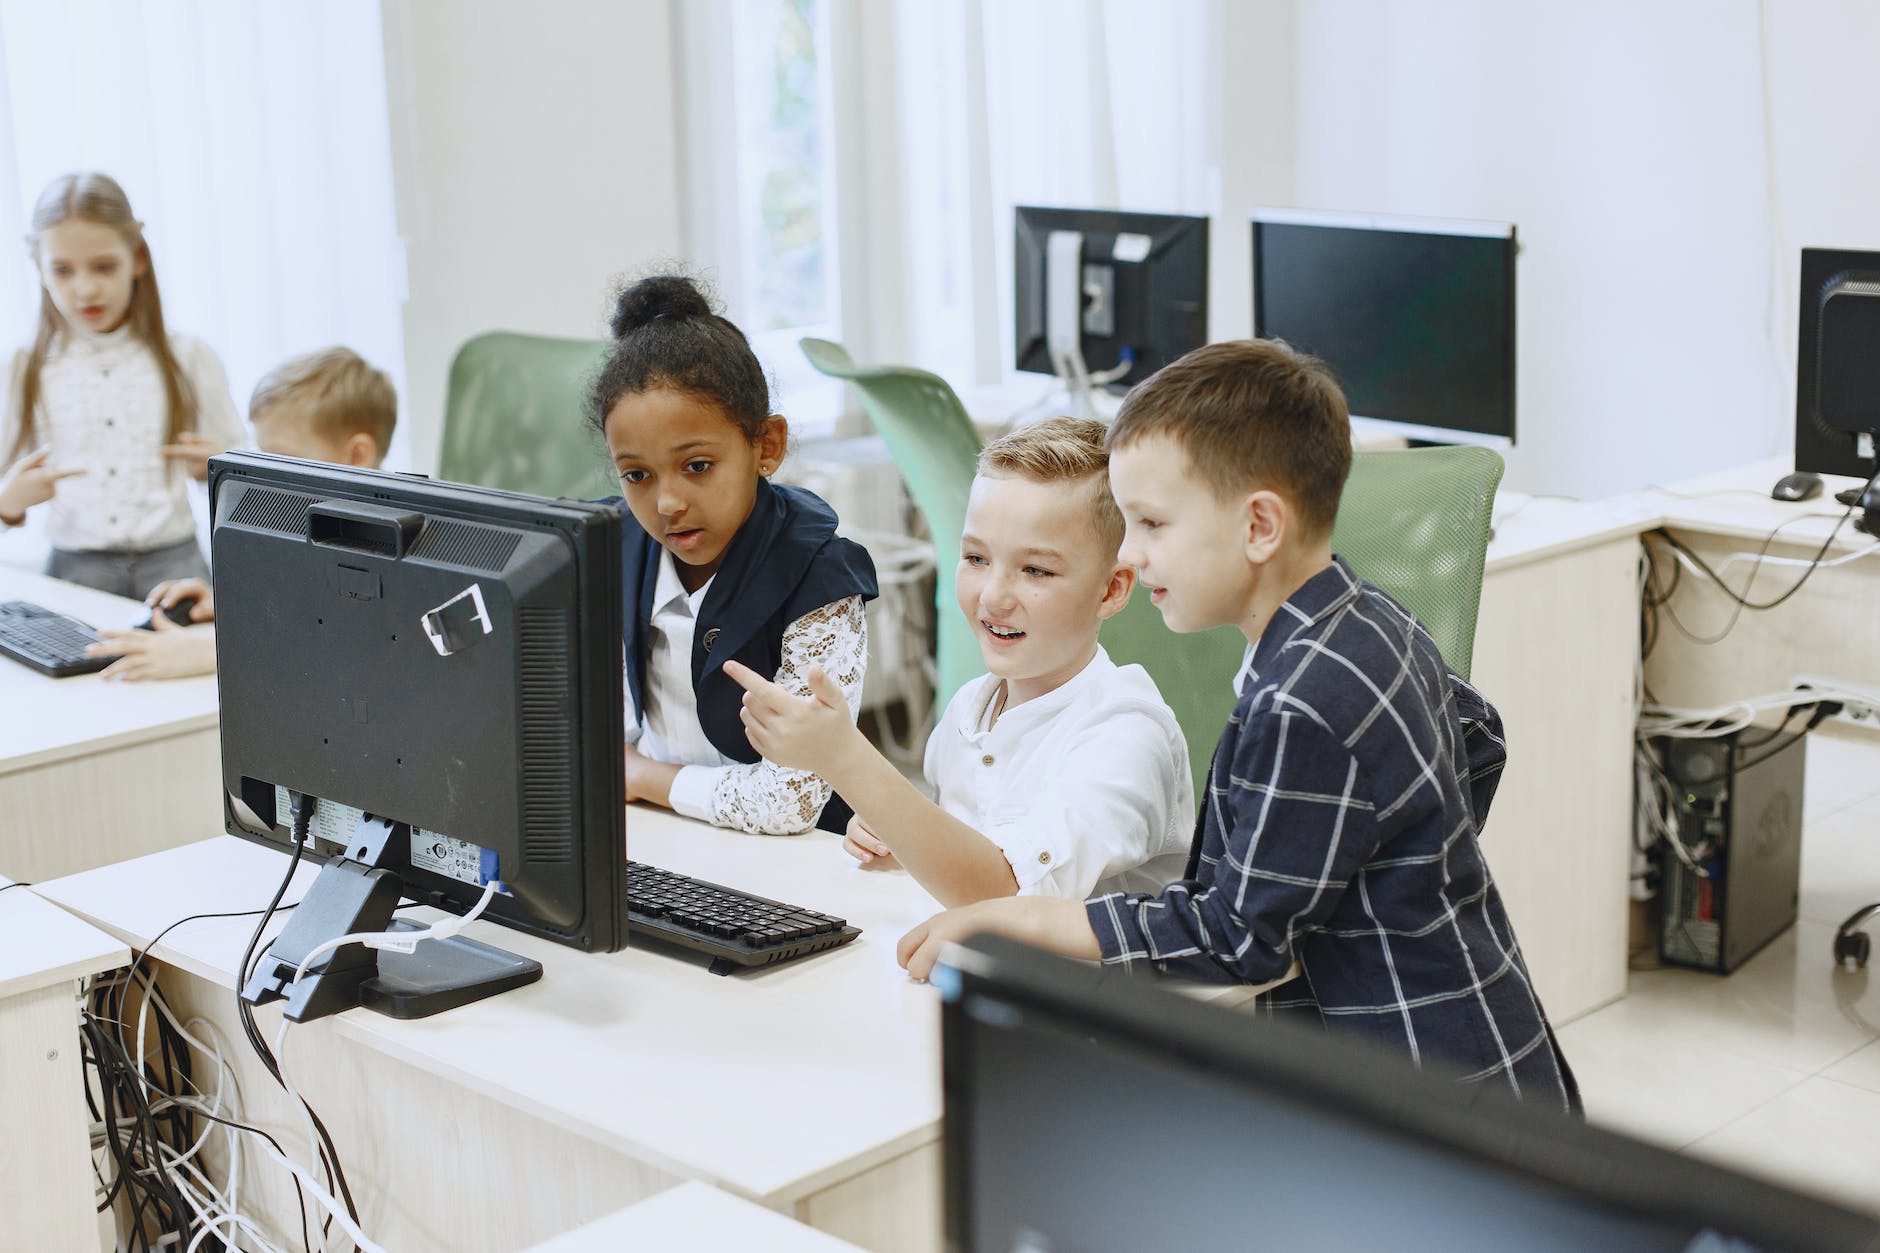 children taking it classes looking at a computer screen